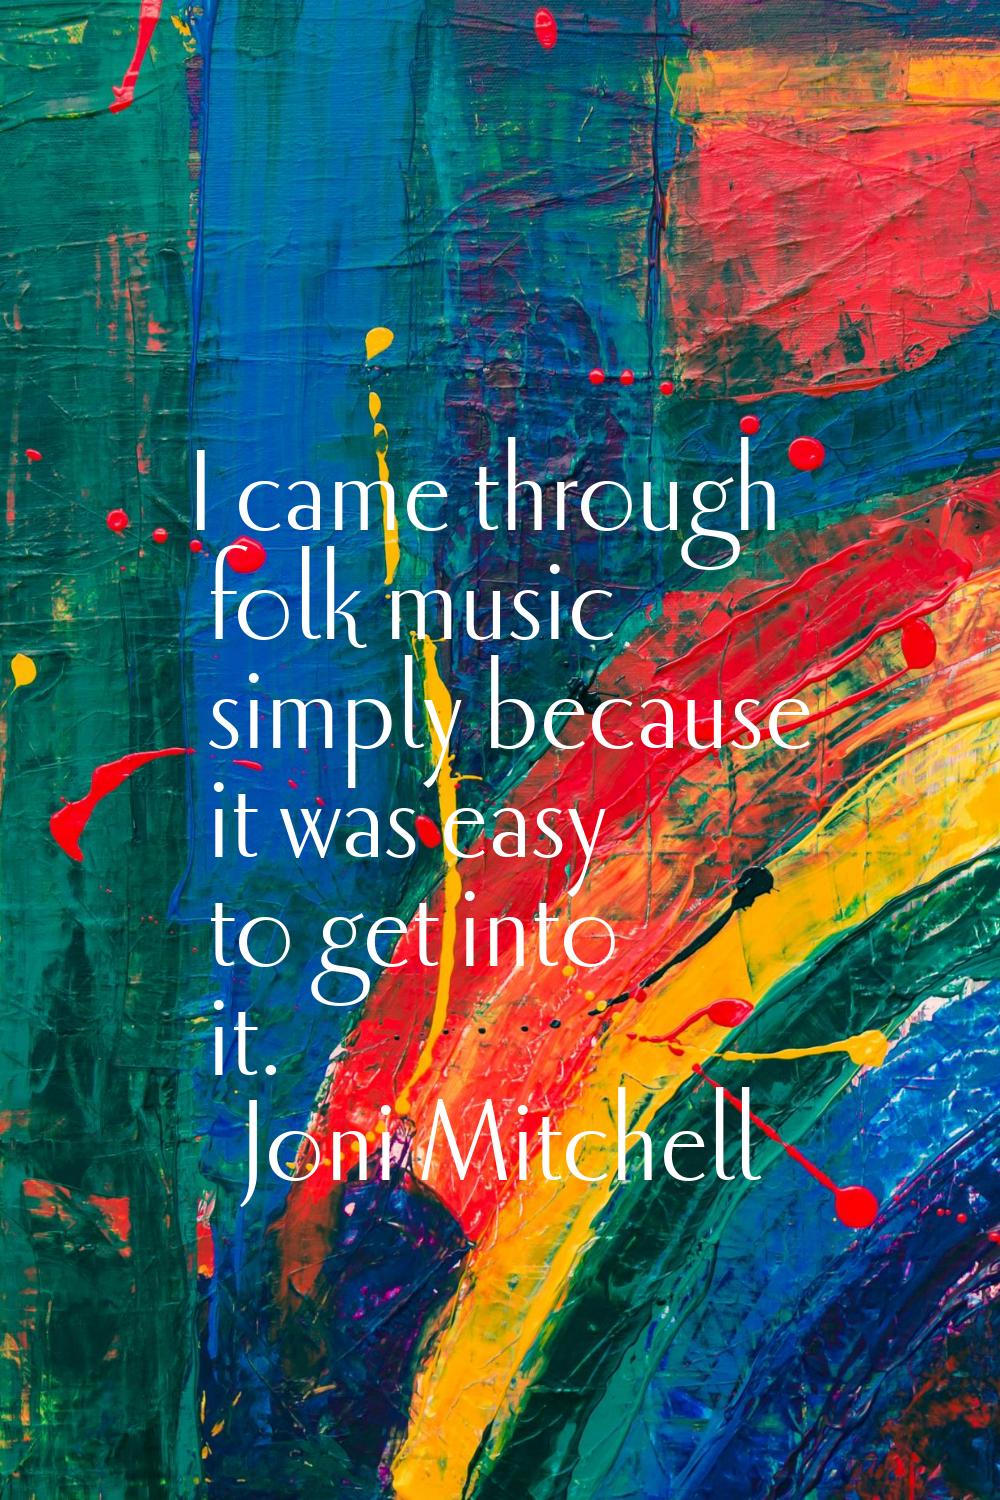 I came through folk music simply because it was easy to get into it.